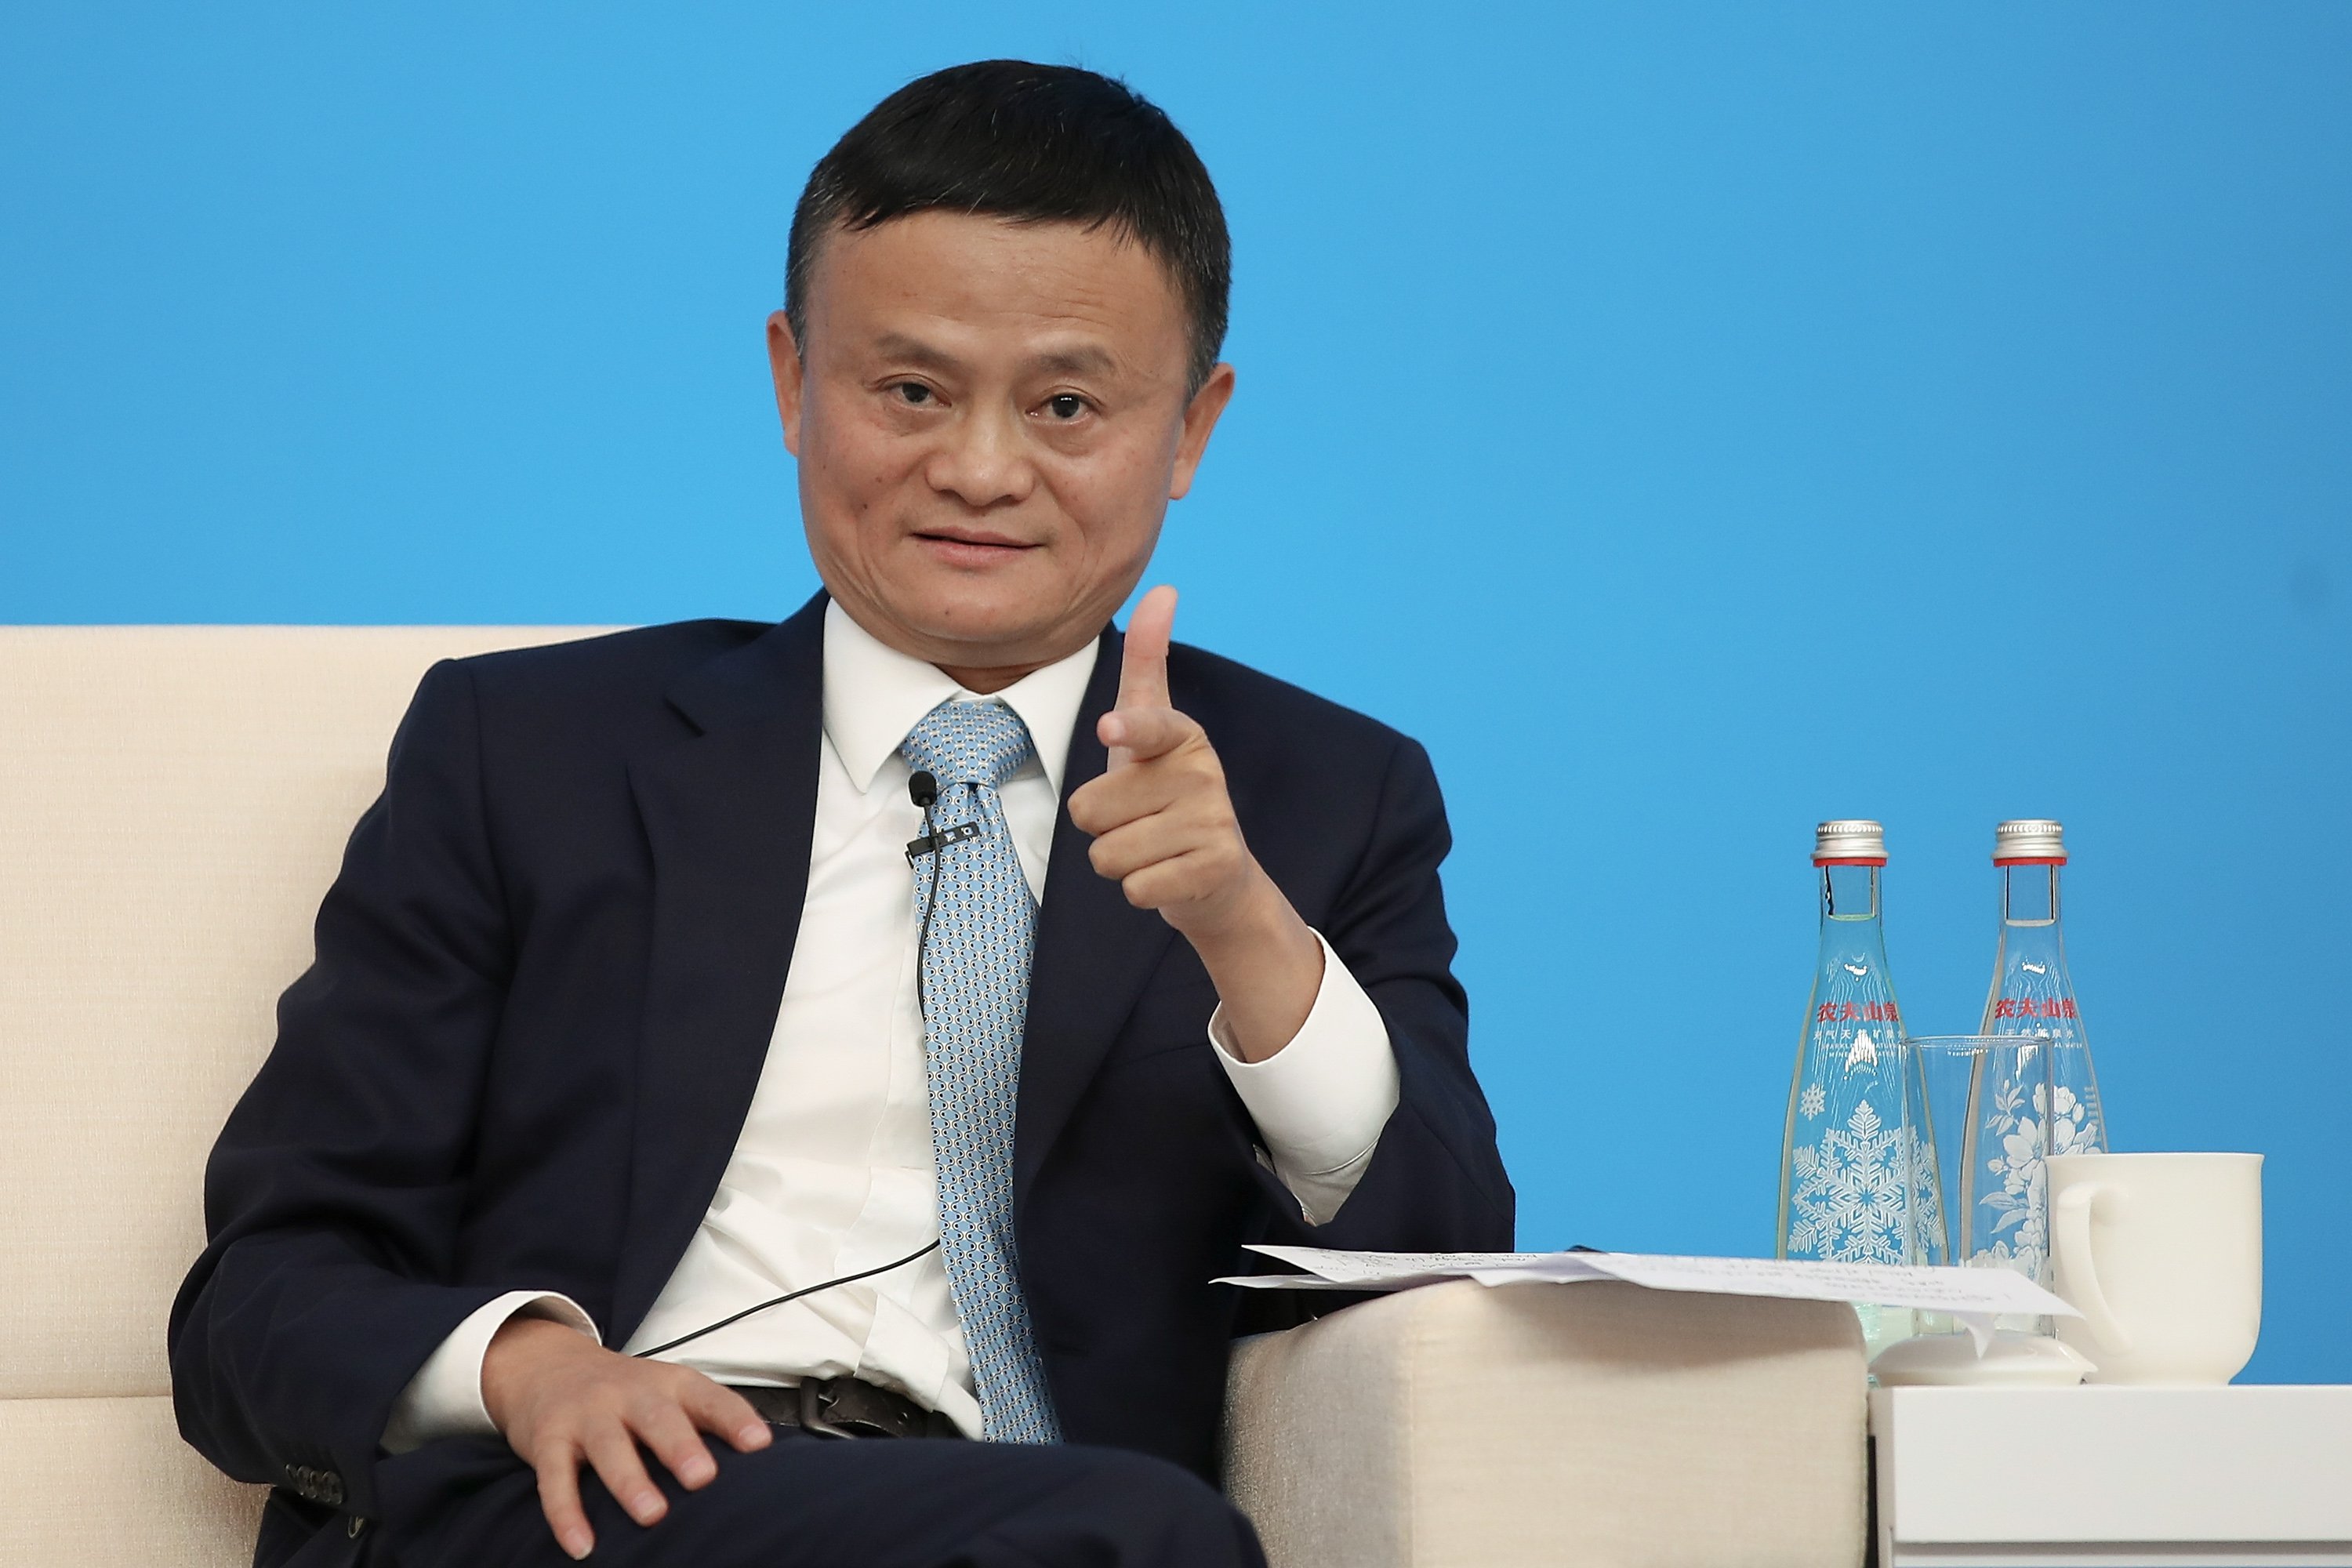 Jack Ma at the National Exhibition and Convention Center in Shanghai, China | Photo: Getty Images